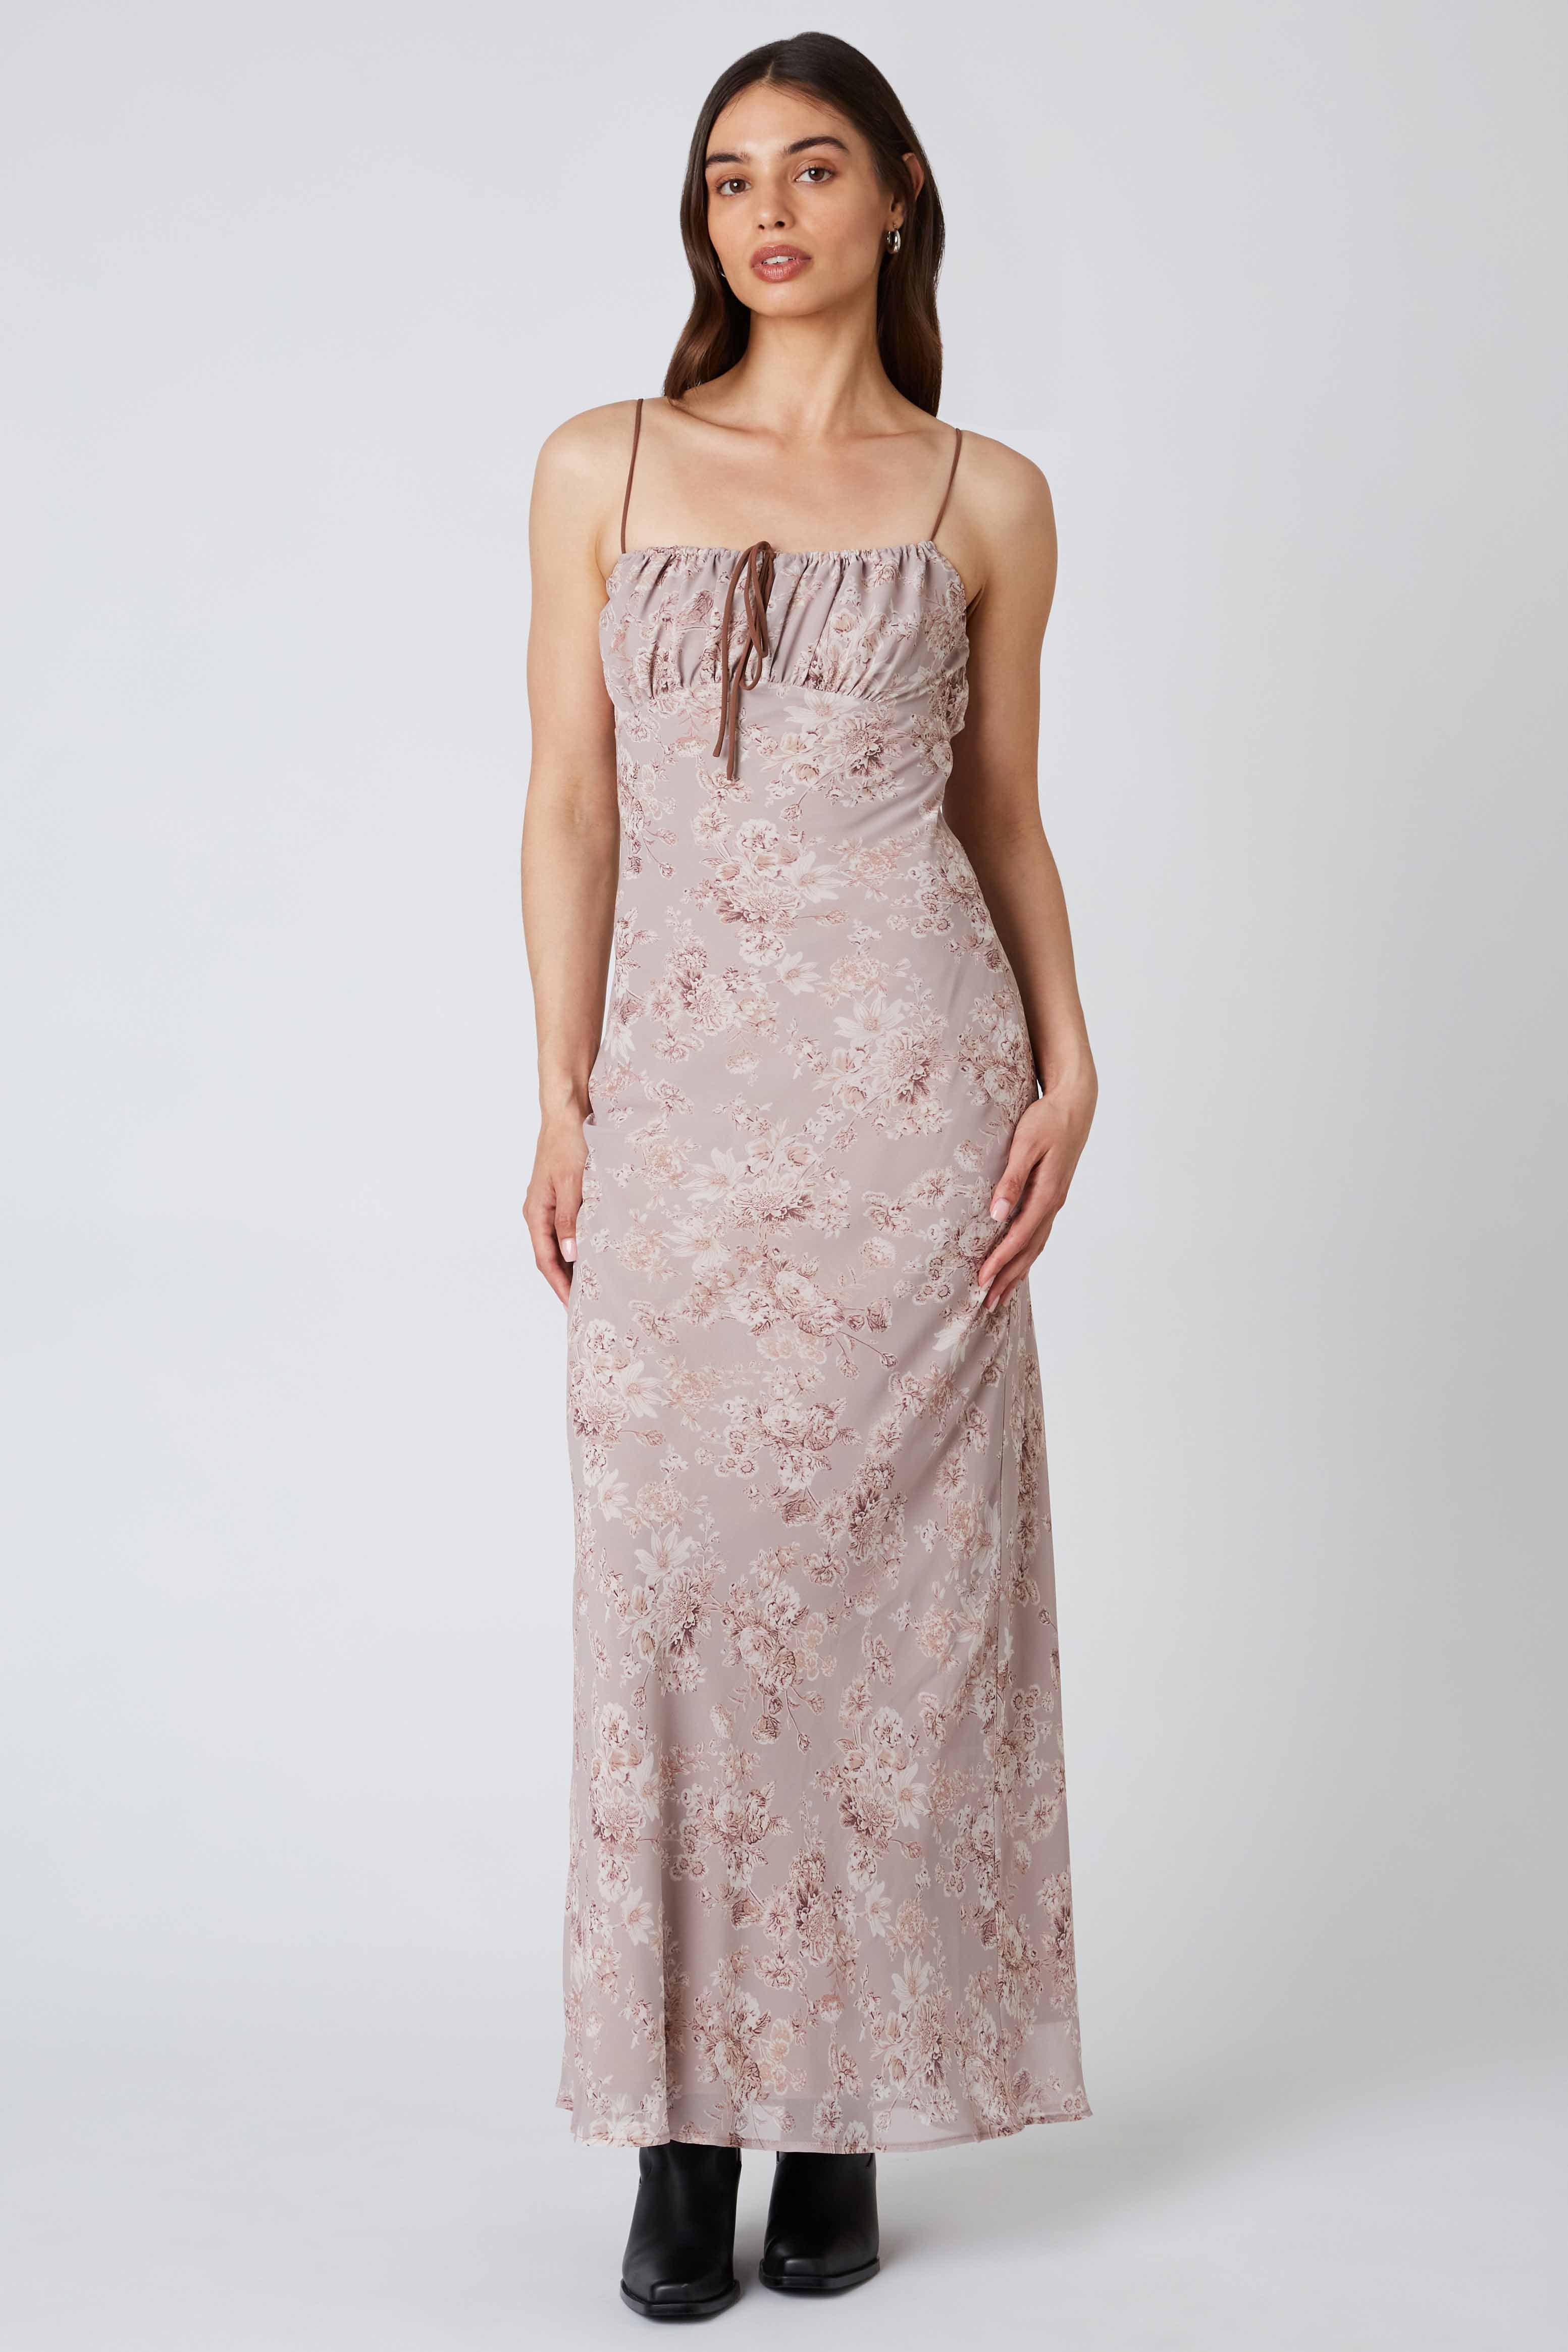 Floral Maxi Dress in Mocha Front View